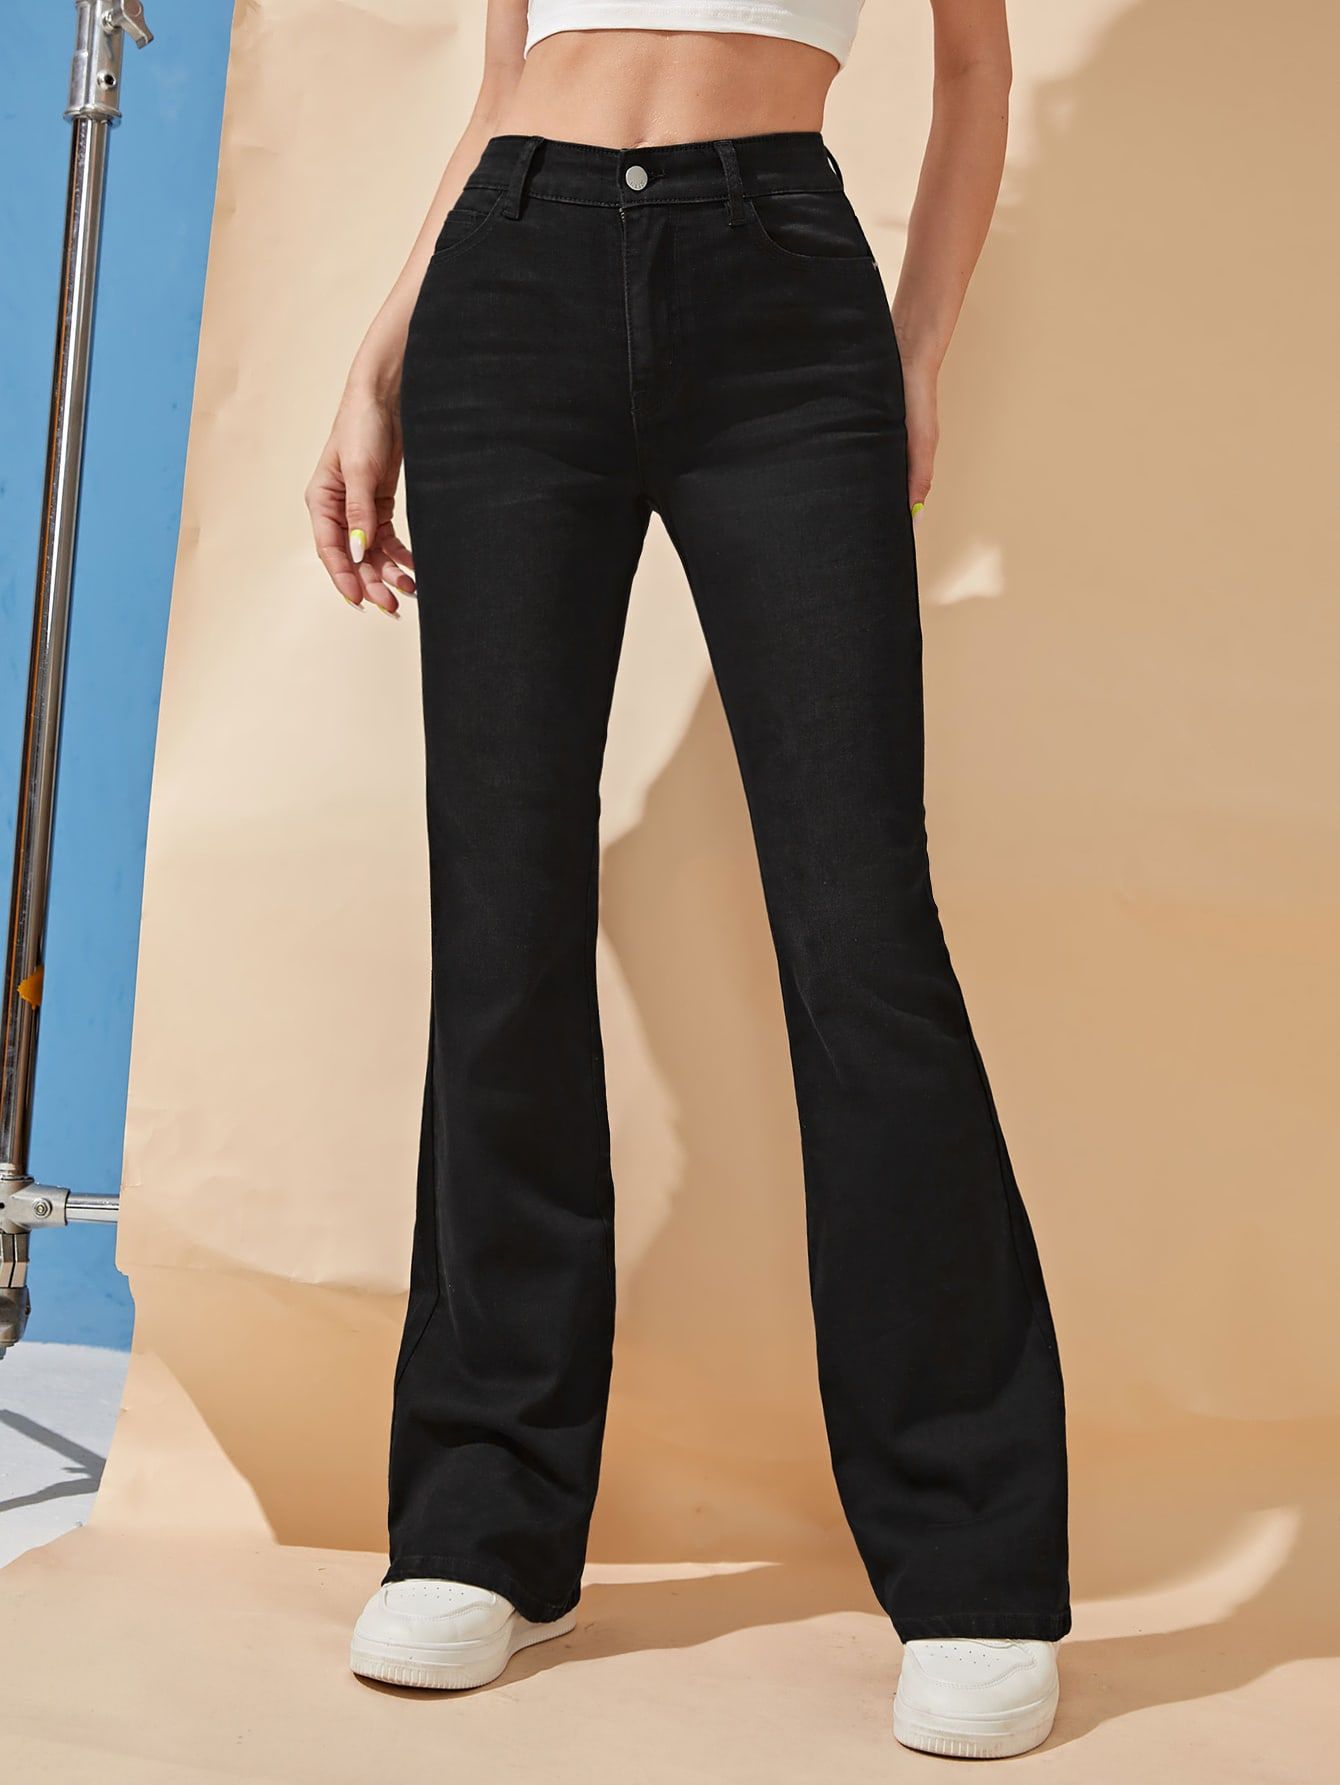 How to Wear Black Flared Jeans: Best 13 Outfit Ideas for Women to Look Lean